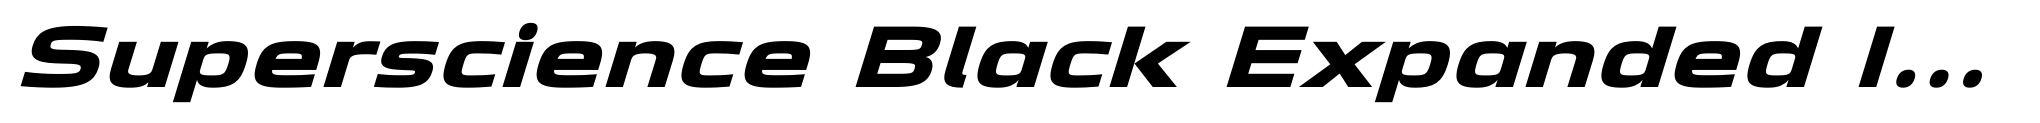 Superscience Black Expanded Italic image